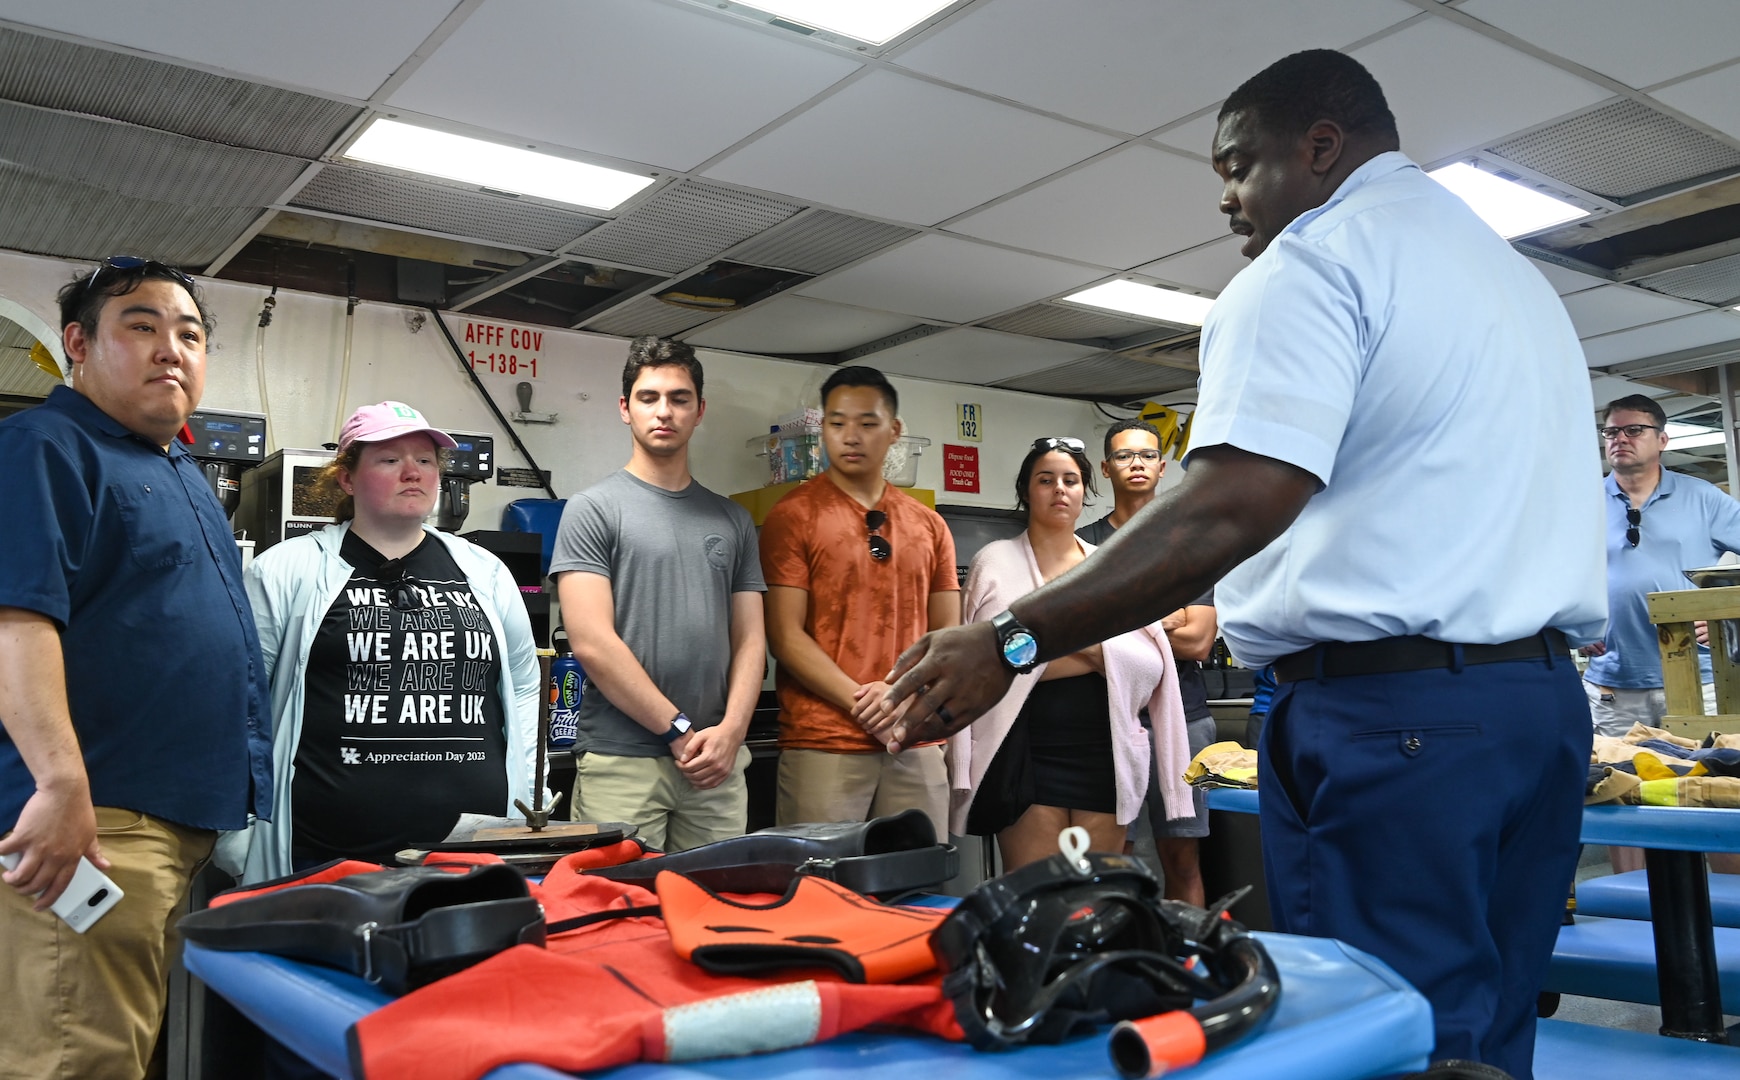 Chief Petty Officer Joshua Pollock showcases survival equipment to visiting tourists aboard the medium endurance cutter USCGC Seneca (WMEC 906) during Fleet Week Miami in PortMiami May 7, 2024. During his speech, Pollock explained the meaning and usage of the ship’s bell, firefighting equipment and diving gear used aboard the cutter. (U.S. Coast Guard photo by Petty Officer 2nd Class Diana Sherbs)